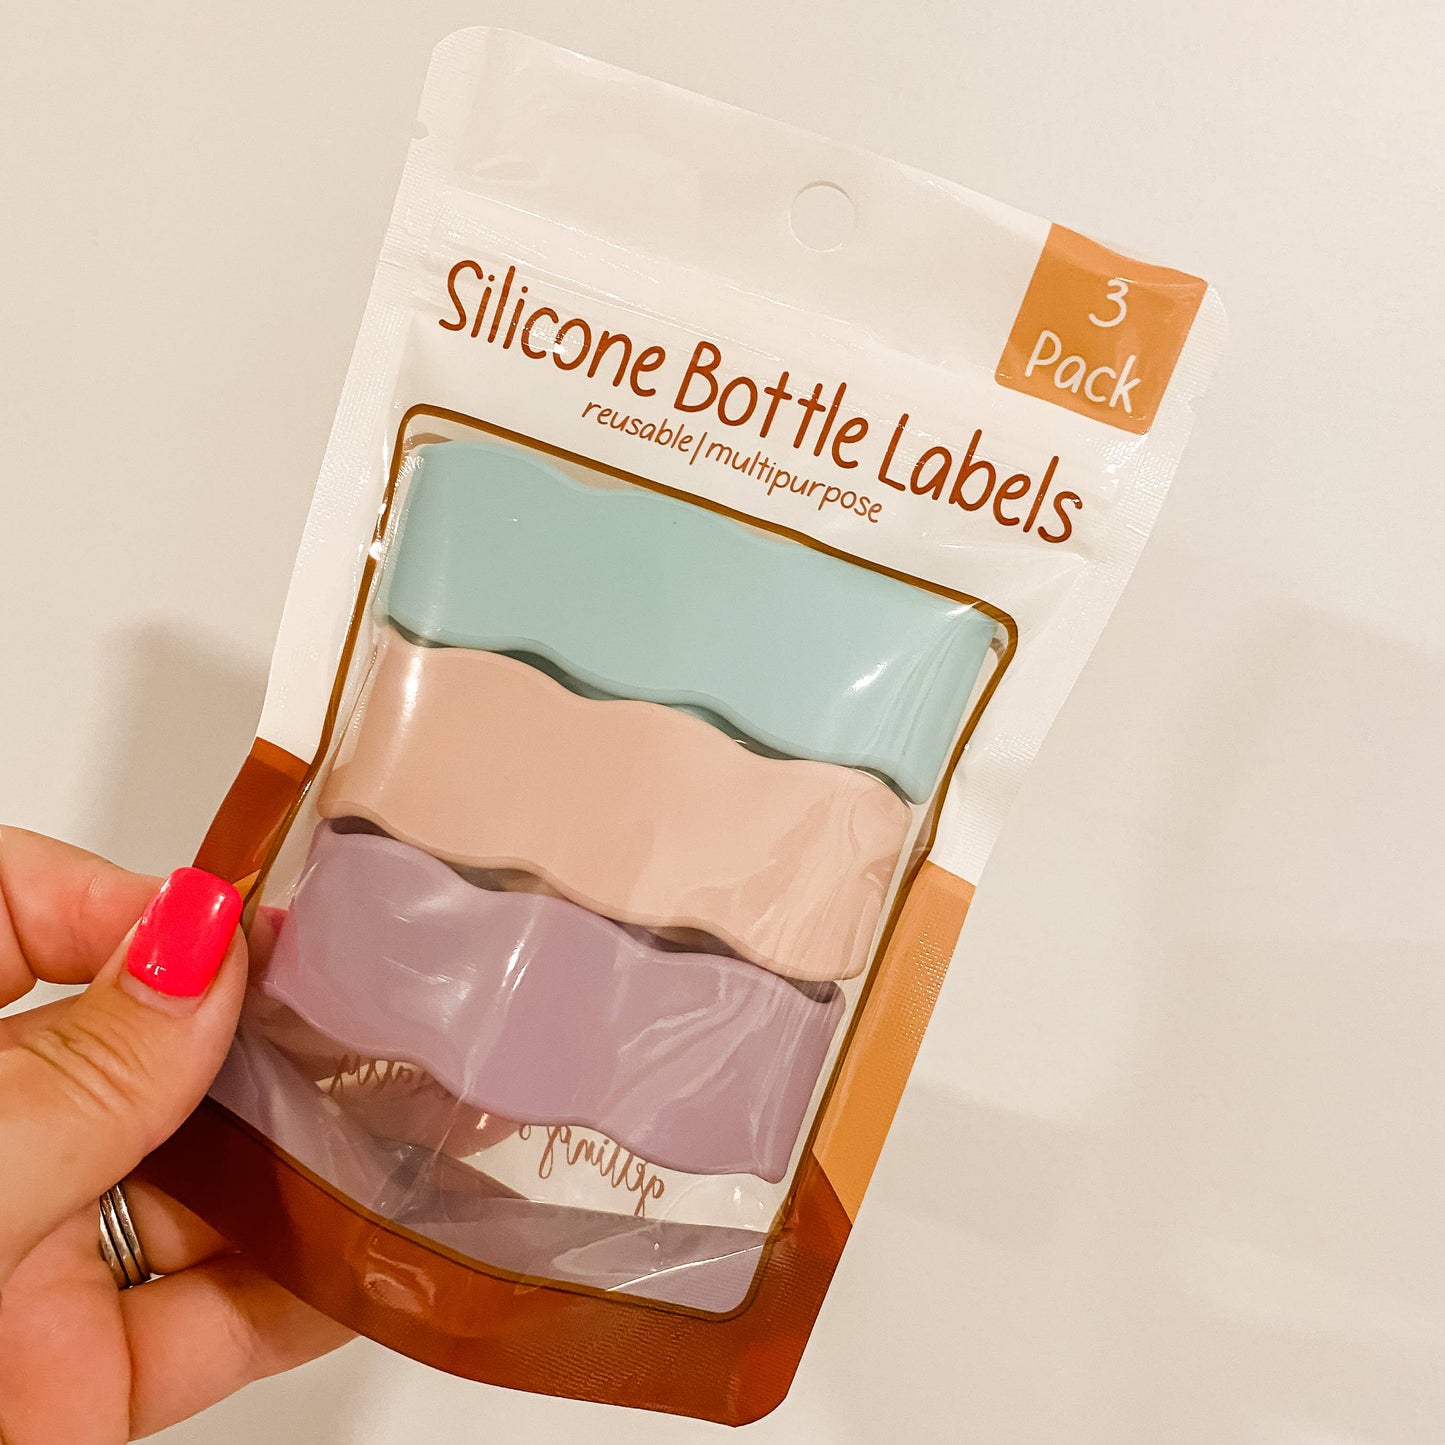 Getting Sew Crafty - Silicone Bottle Label - 3 Pack